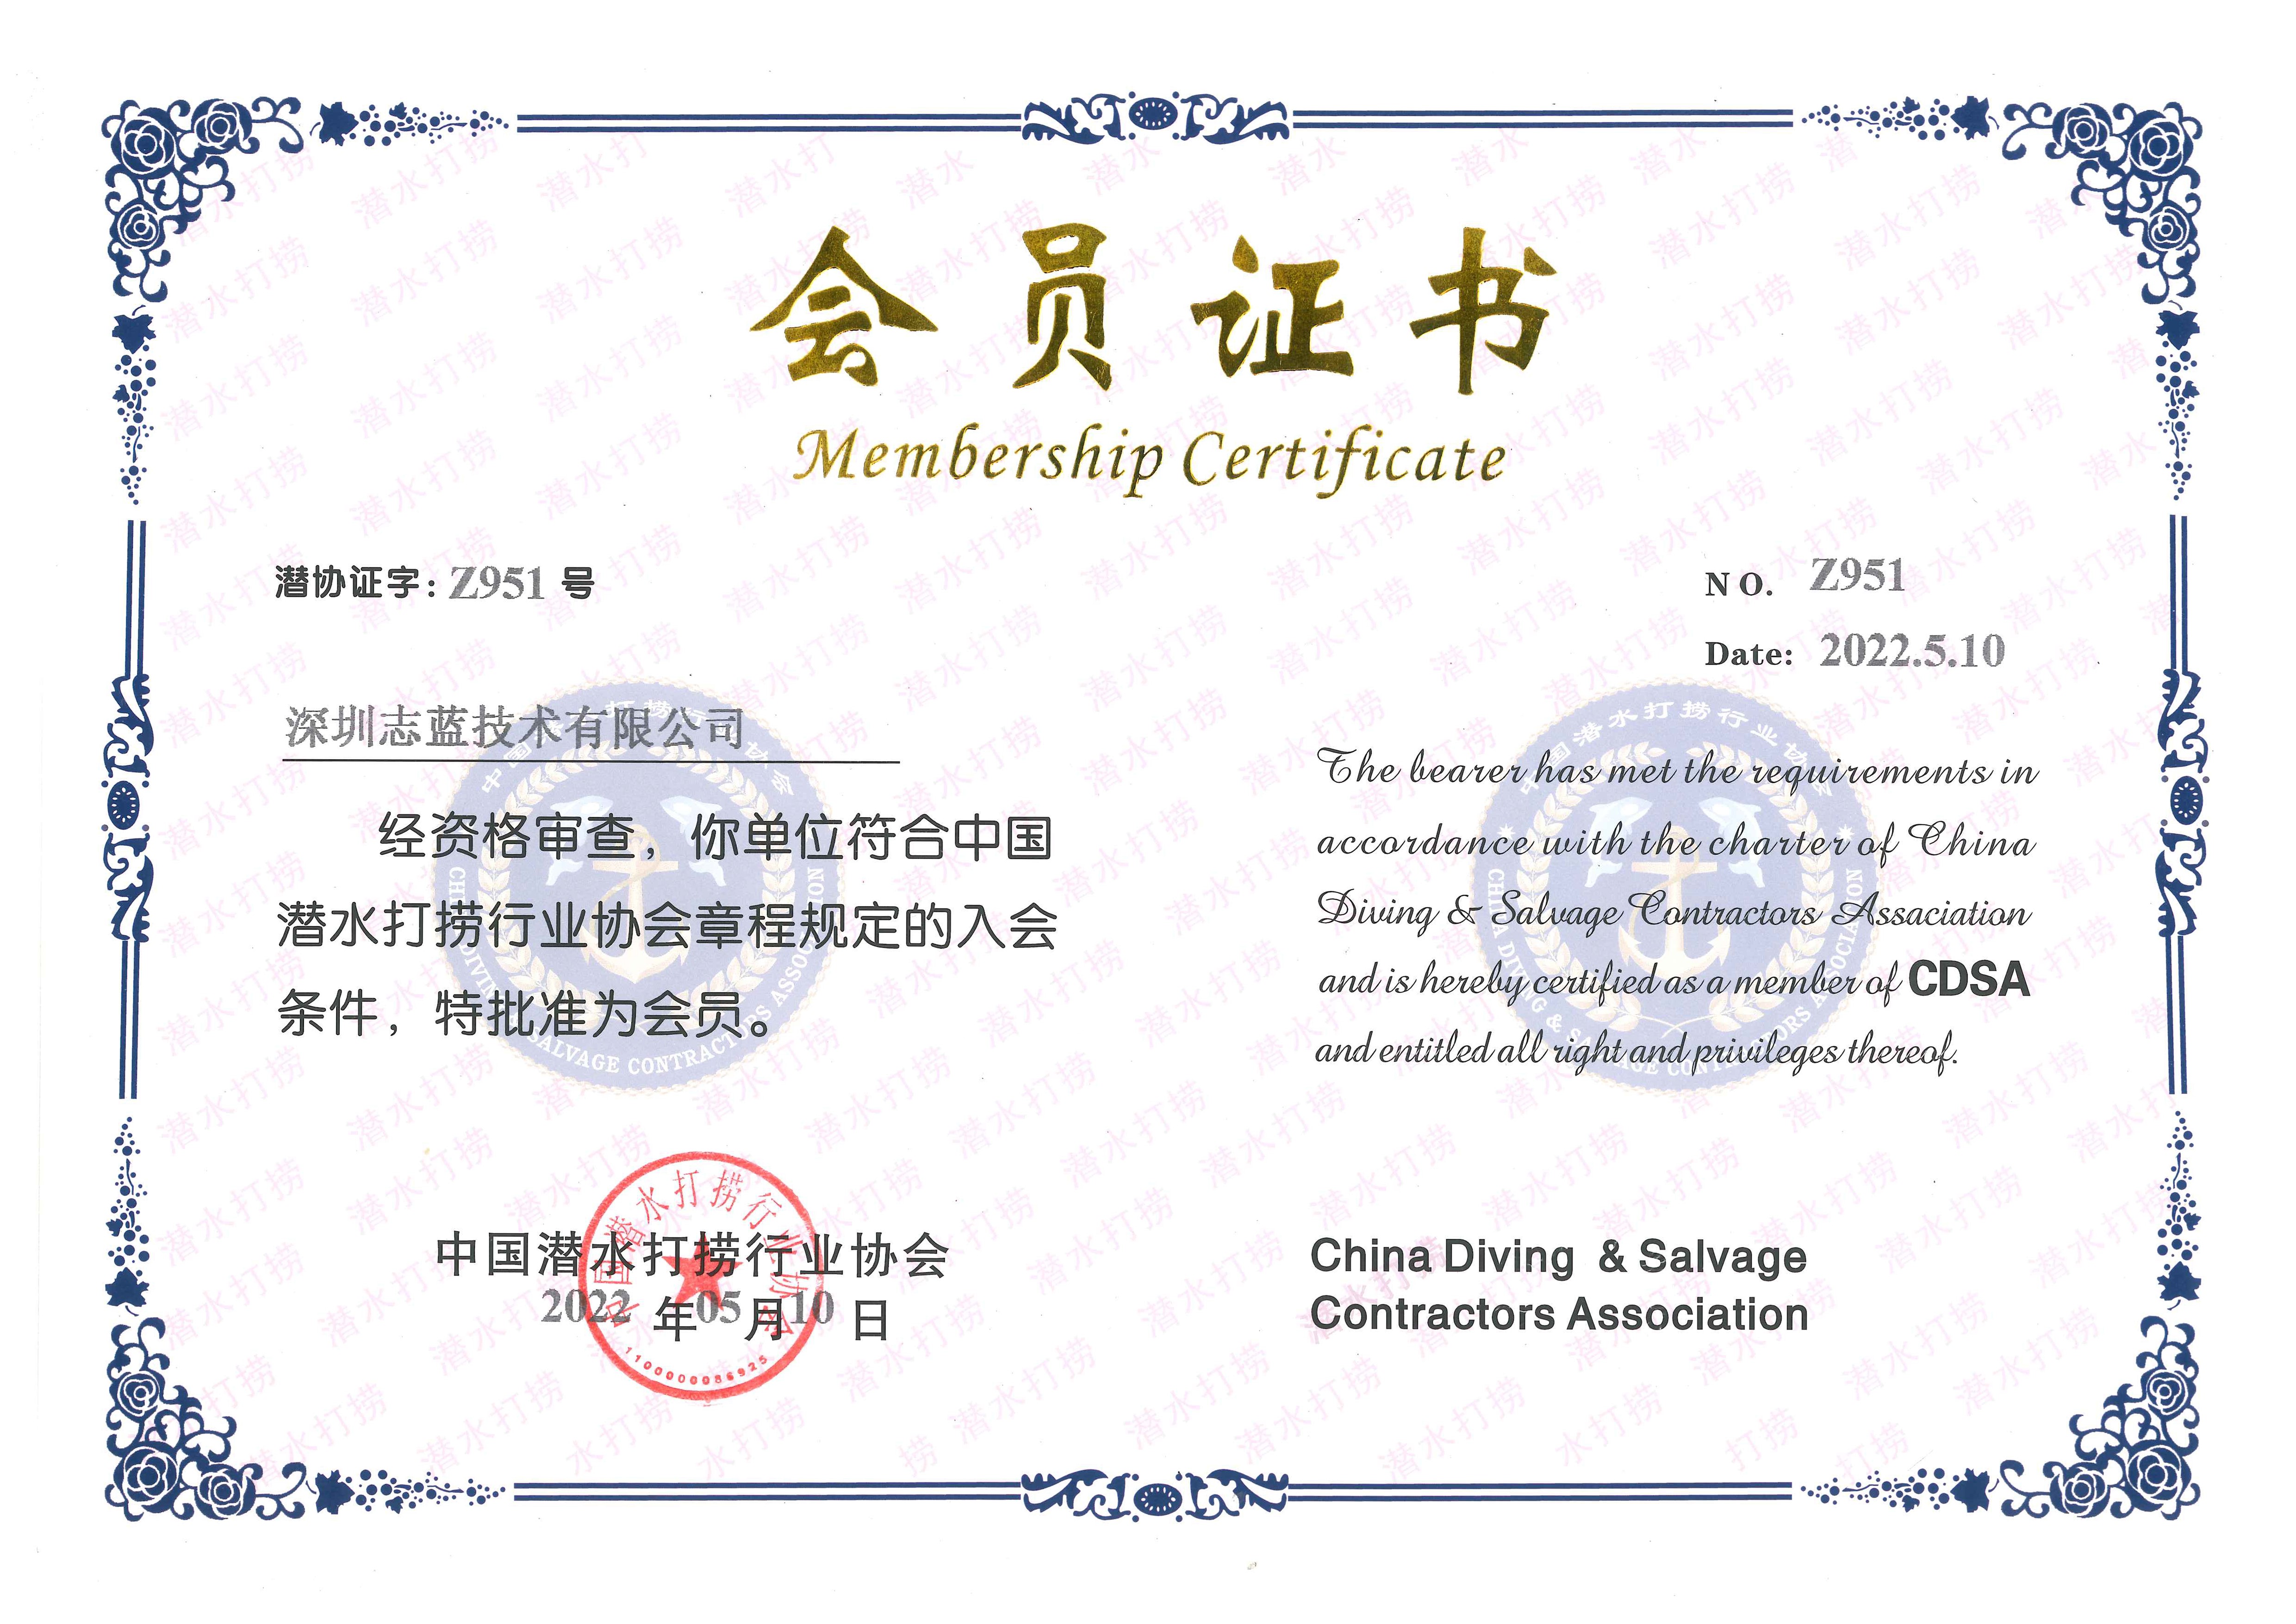 China Diving & Salvage Contractors Association certification